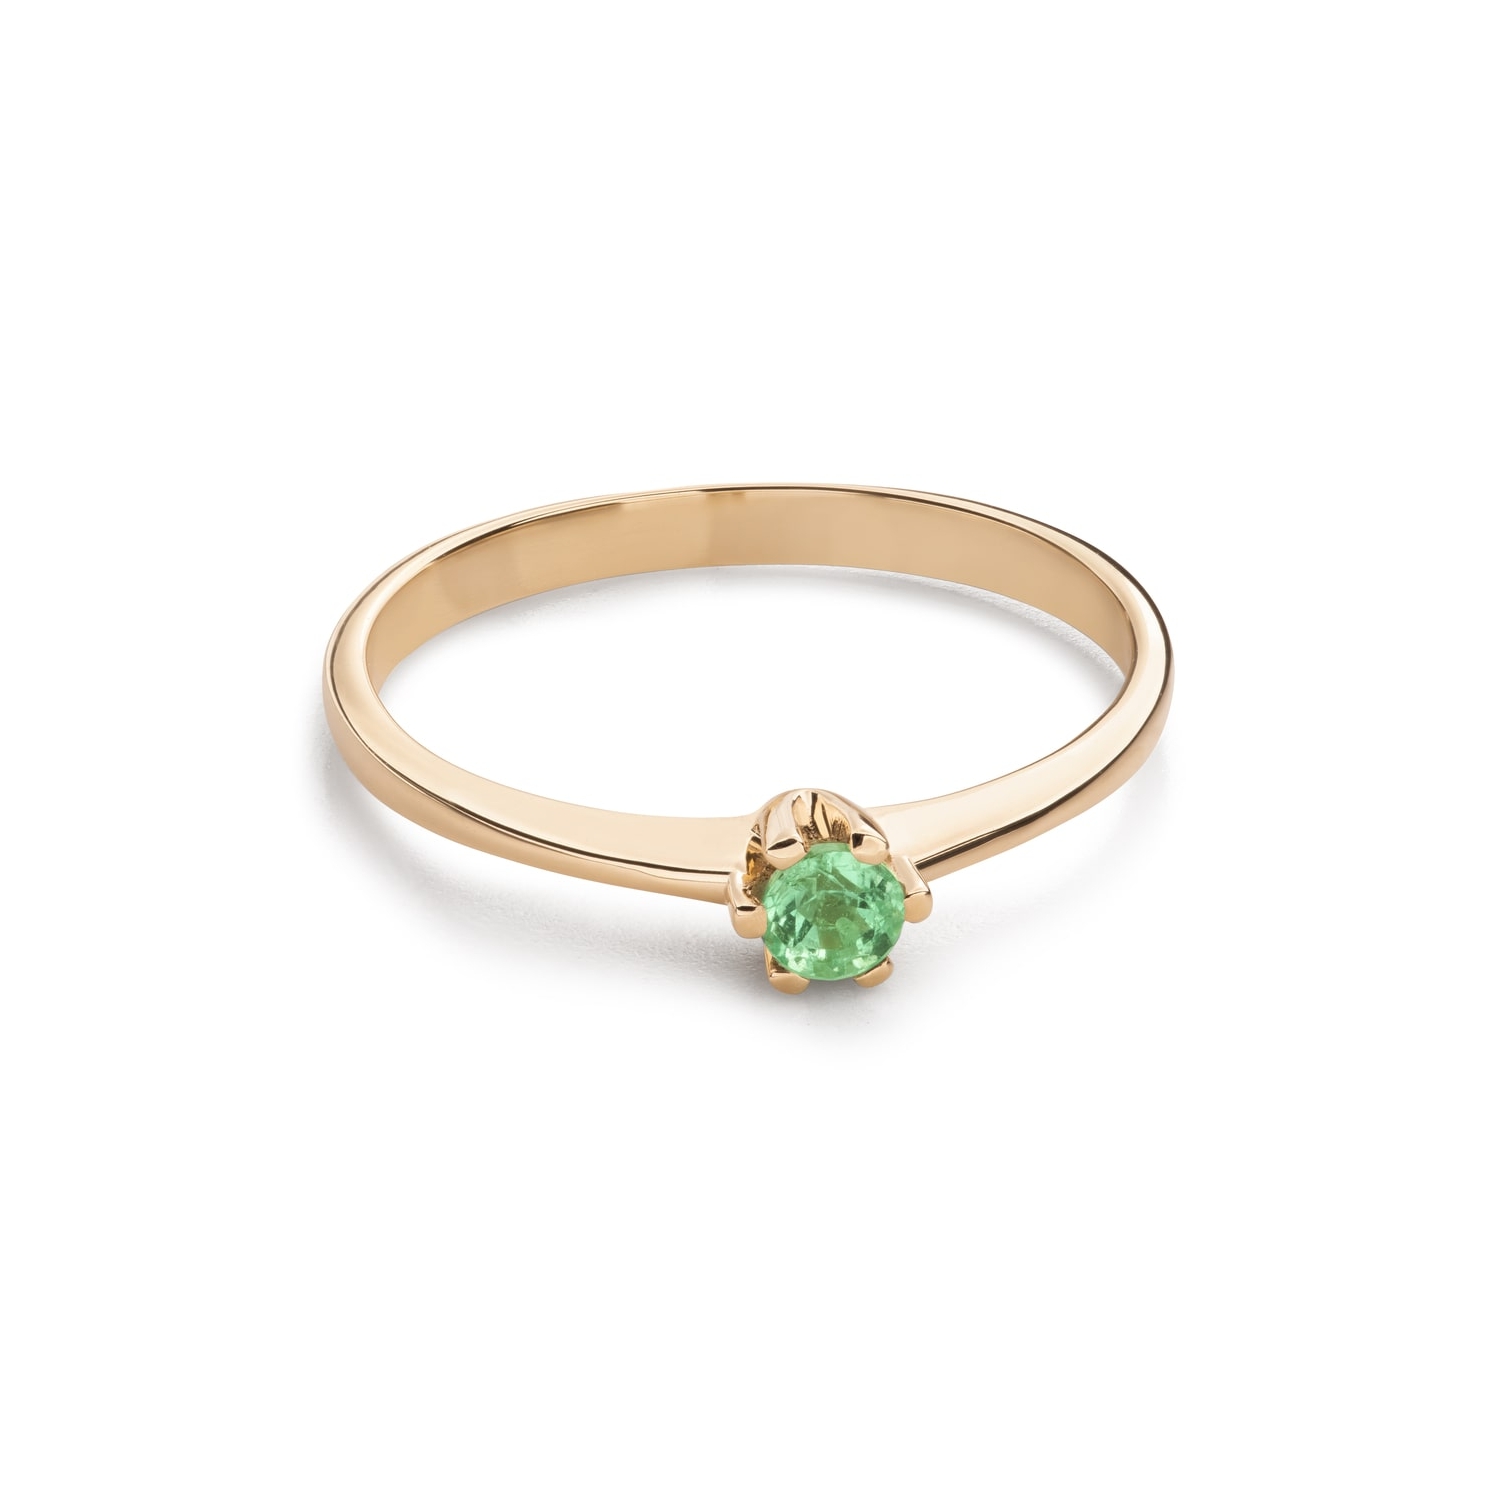 Engagement ring with gemstones "Emerald 60"